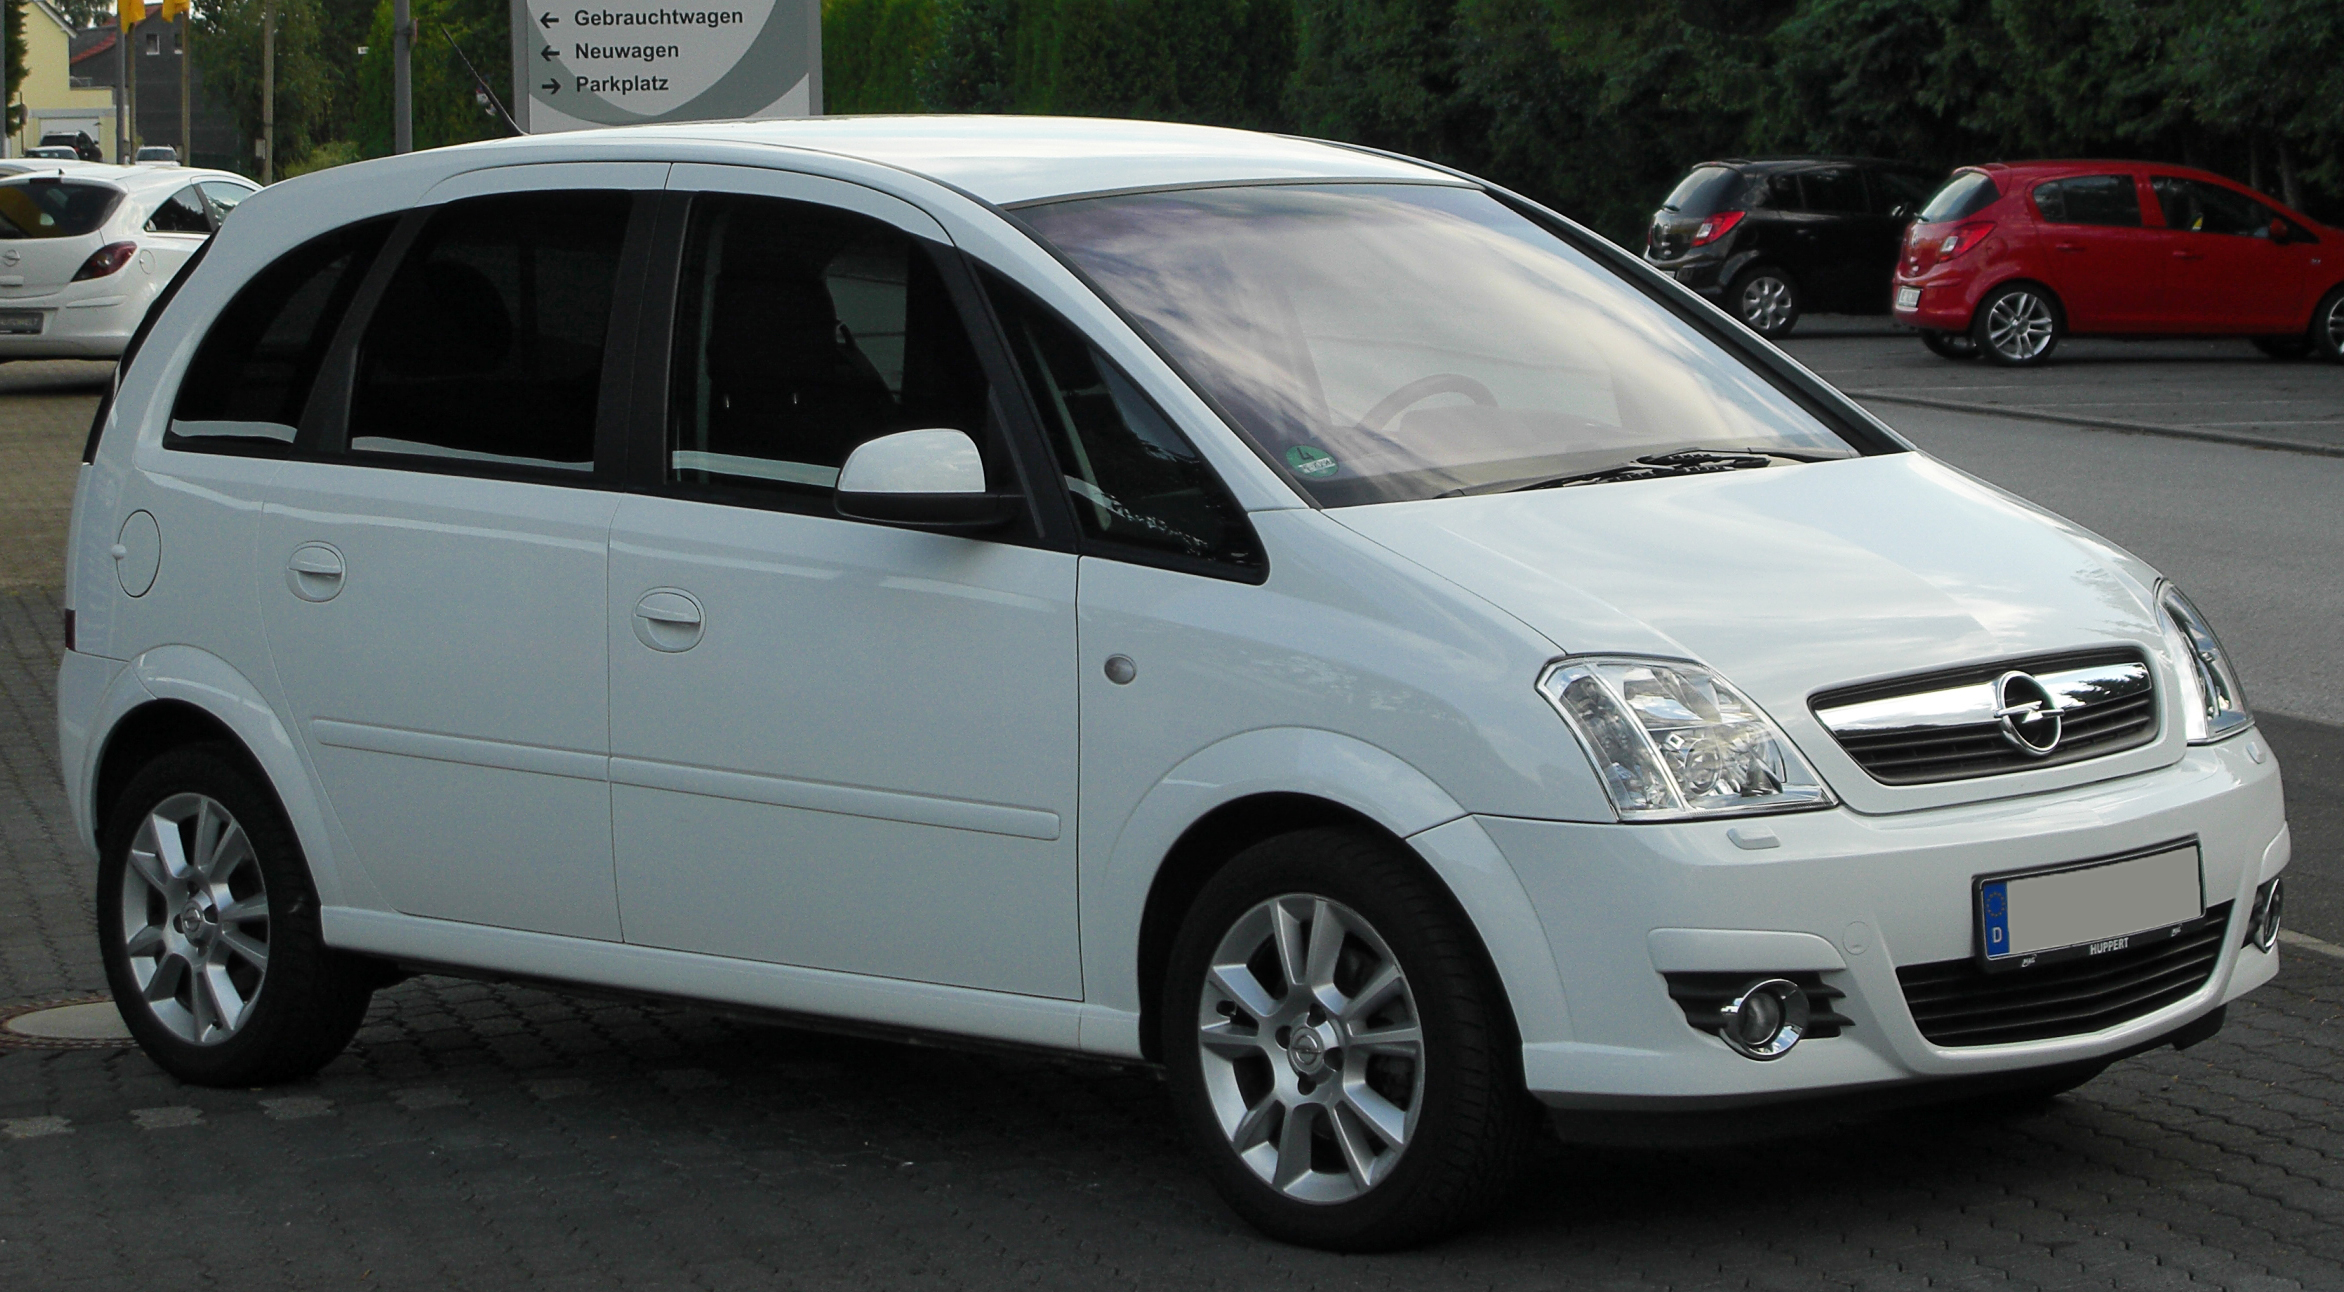 File:Opel Meriva A 1.8 Cosmo Facelift front-1 20100716.jpg